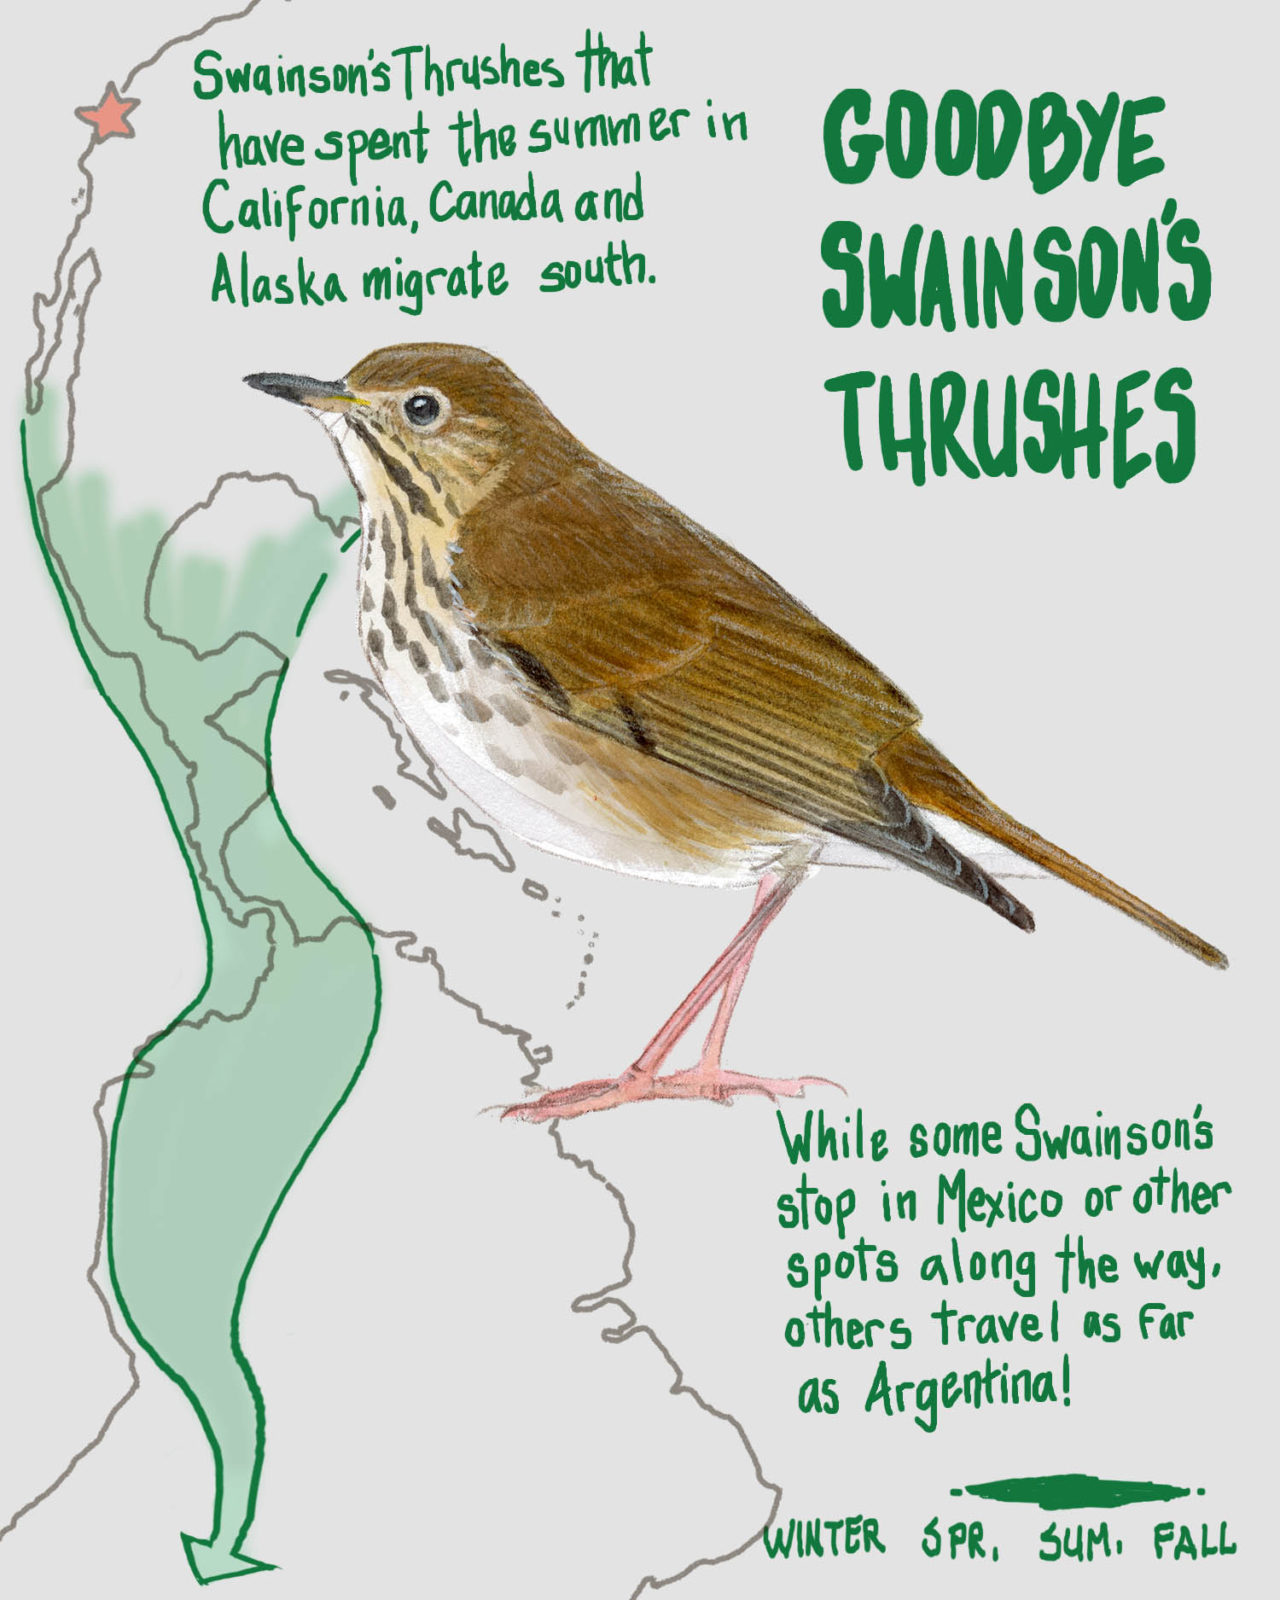 In winter we also say goodbye to Swainson's Thrushes, which are headed south to warmer climes.